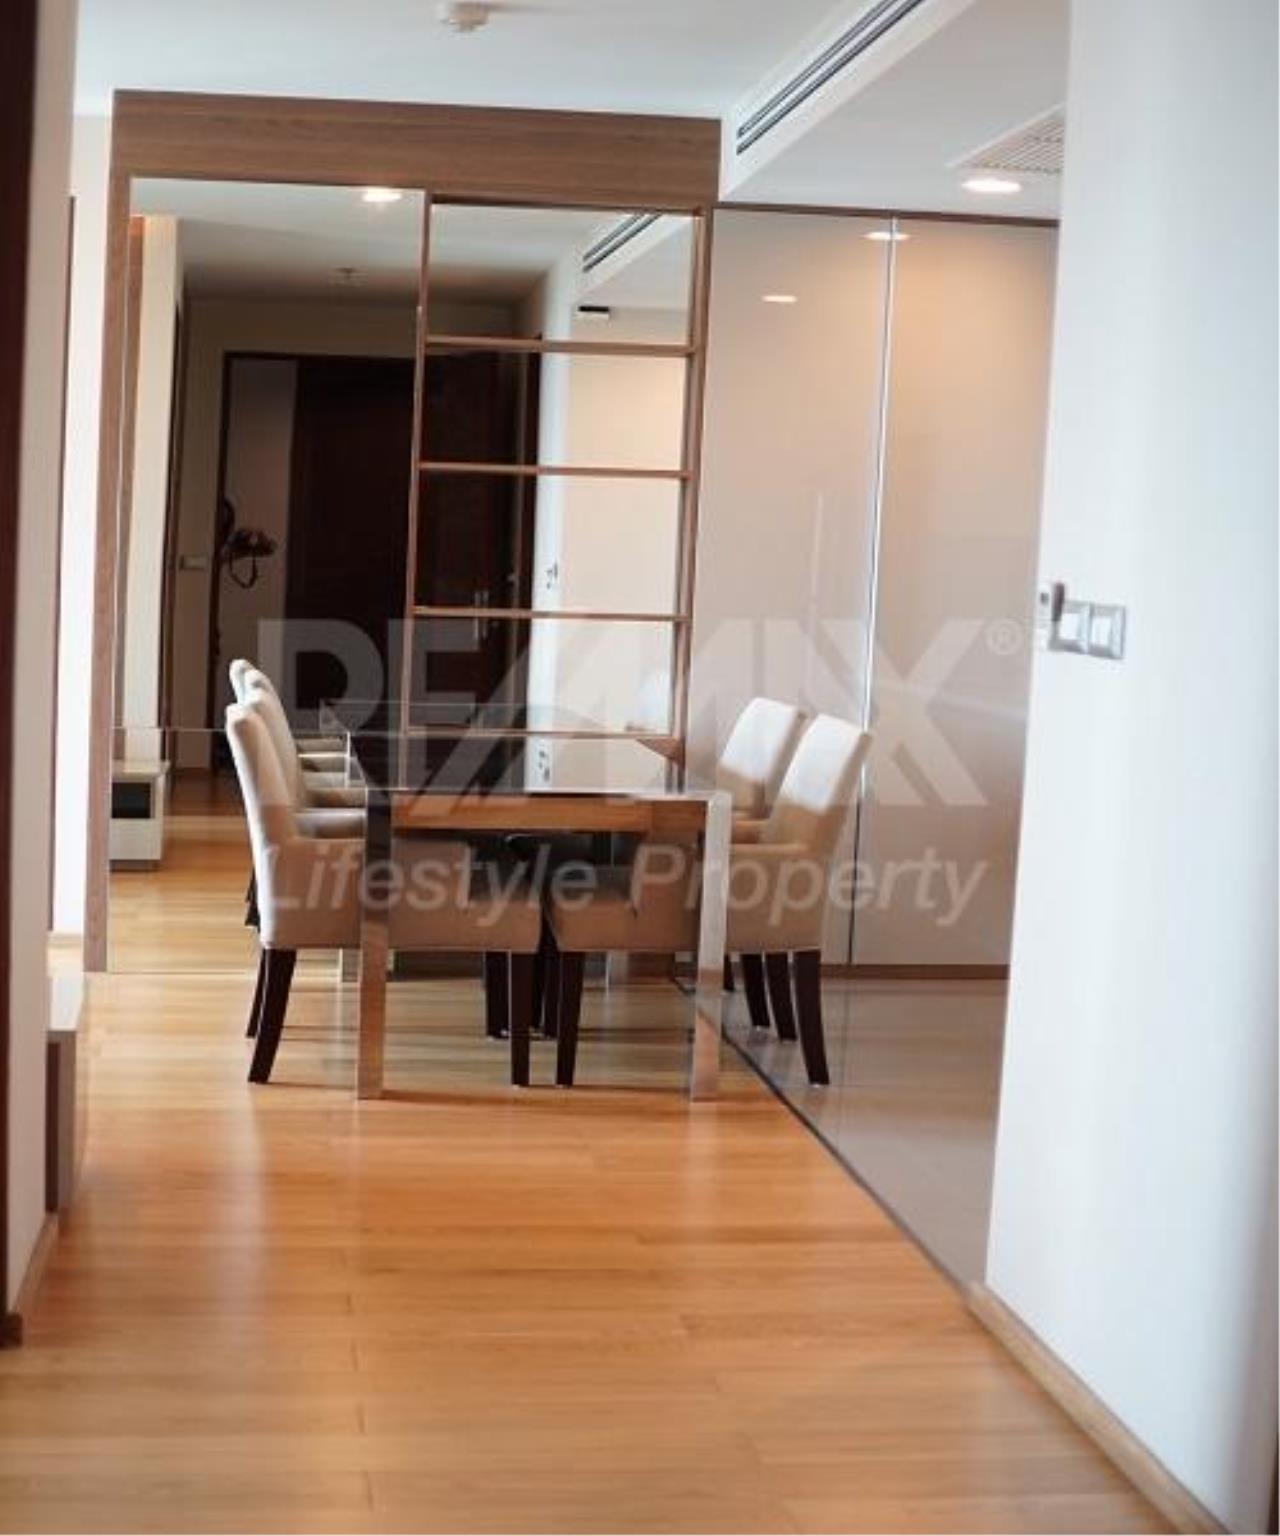 RE/MAX LifeStyle Property Agency's The Address Asoke 13